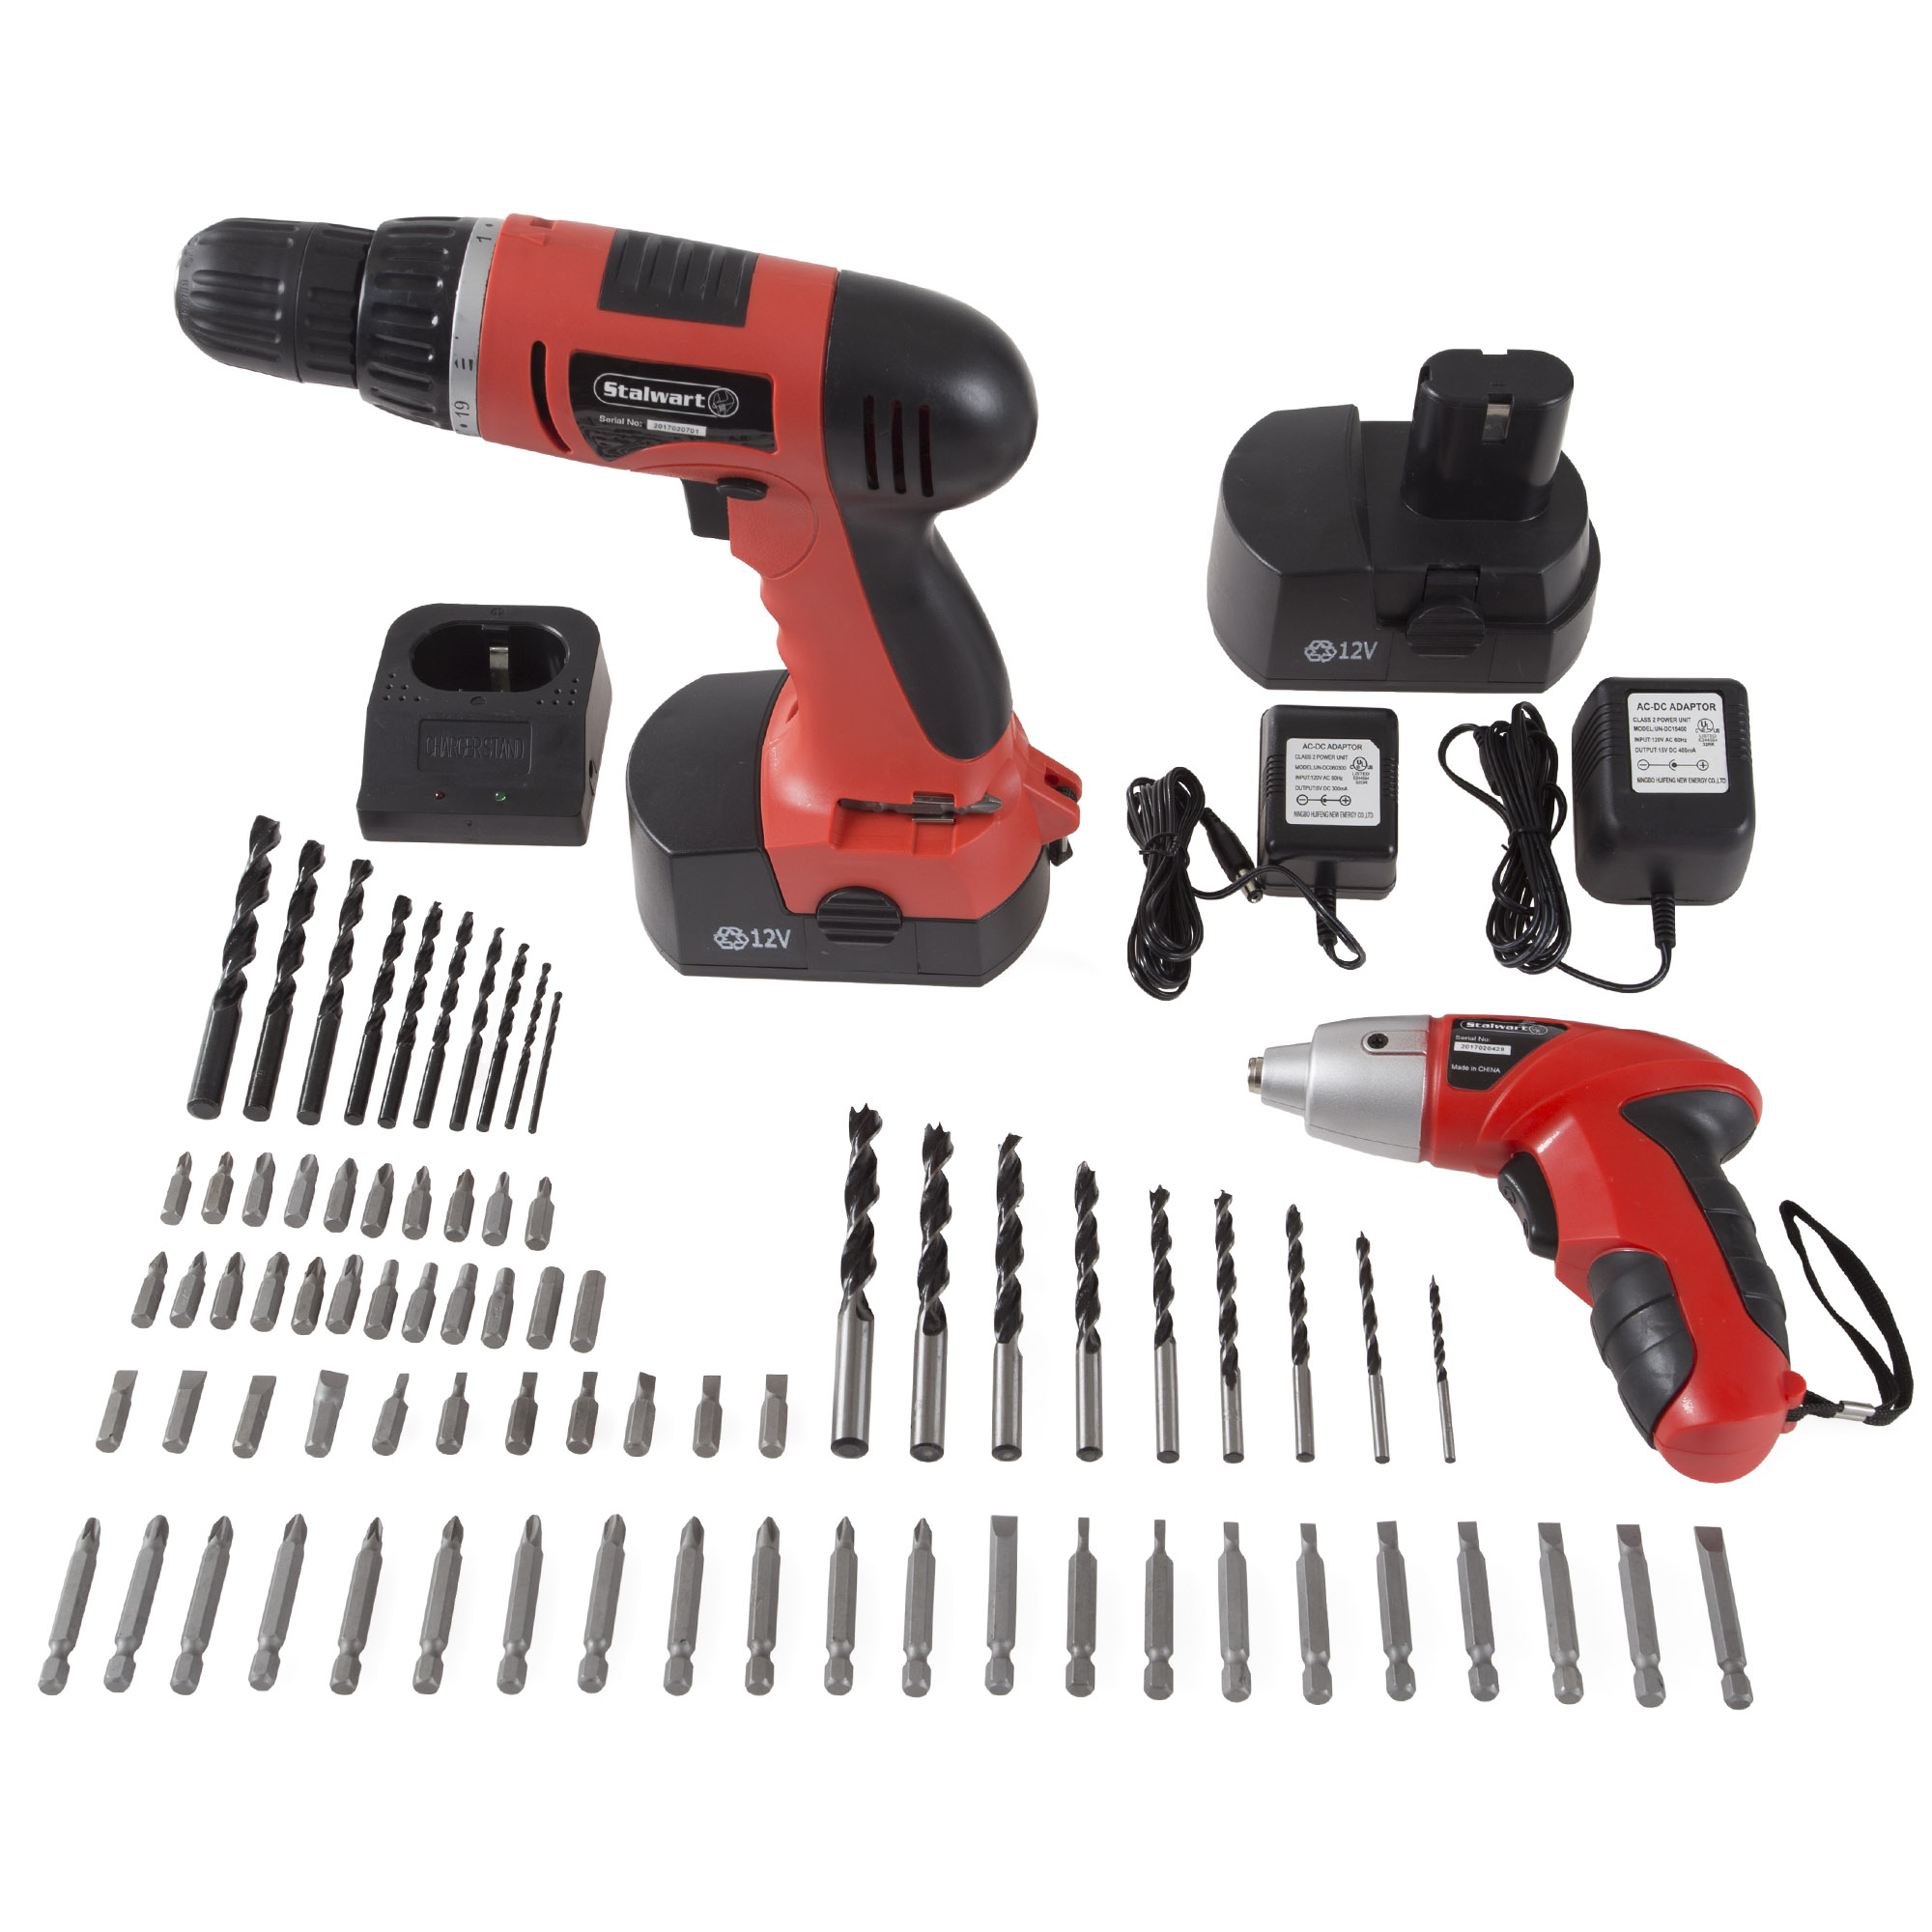 Stalwart 12-Volt Cordless Drill and 3.6-Volt Driver Tool Sets with 74-Piece Project Kit, W550005 - image 1 of 5